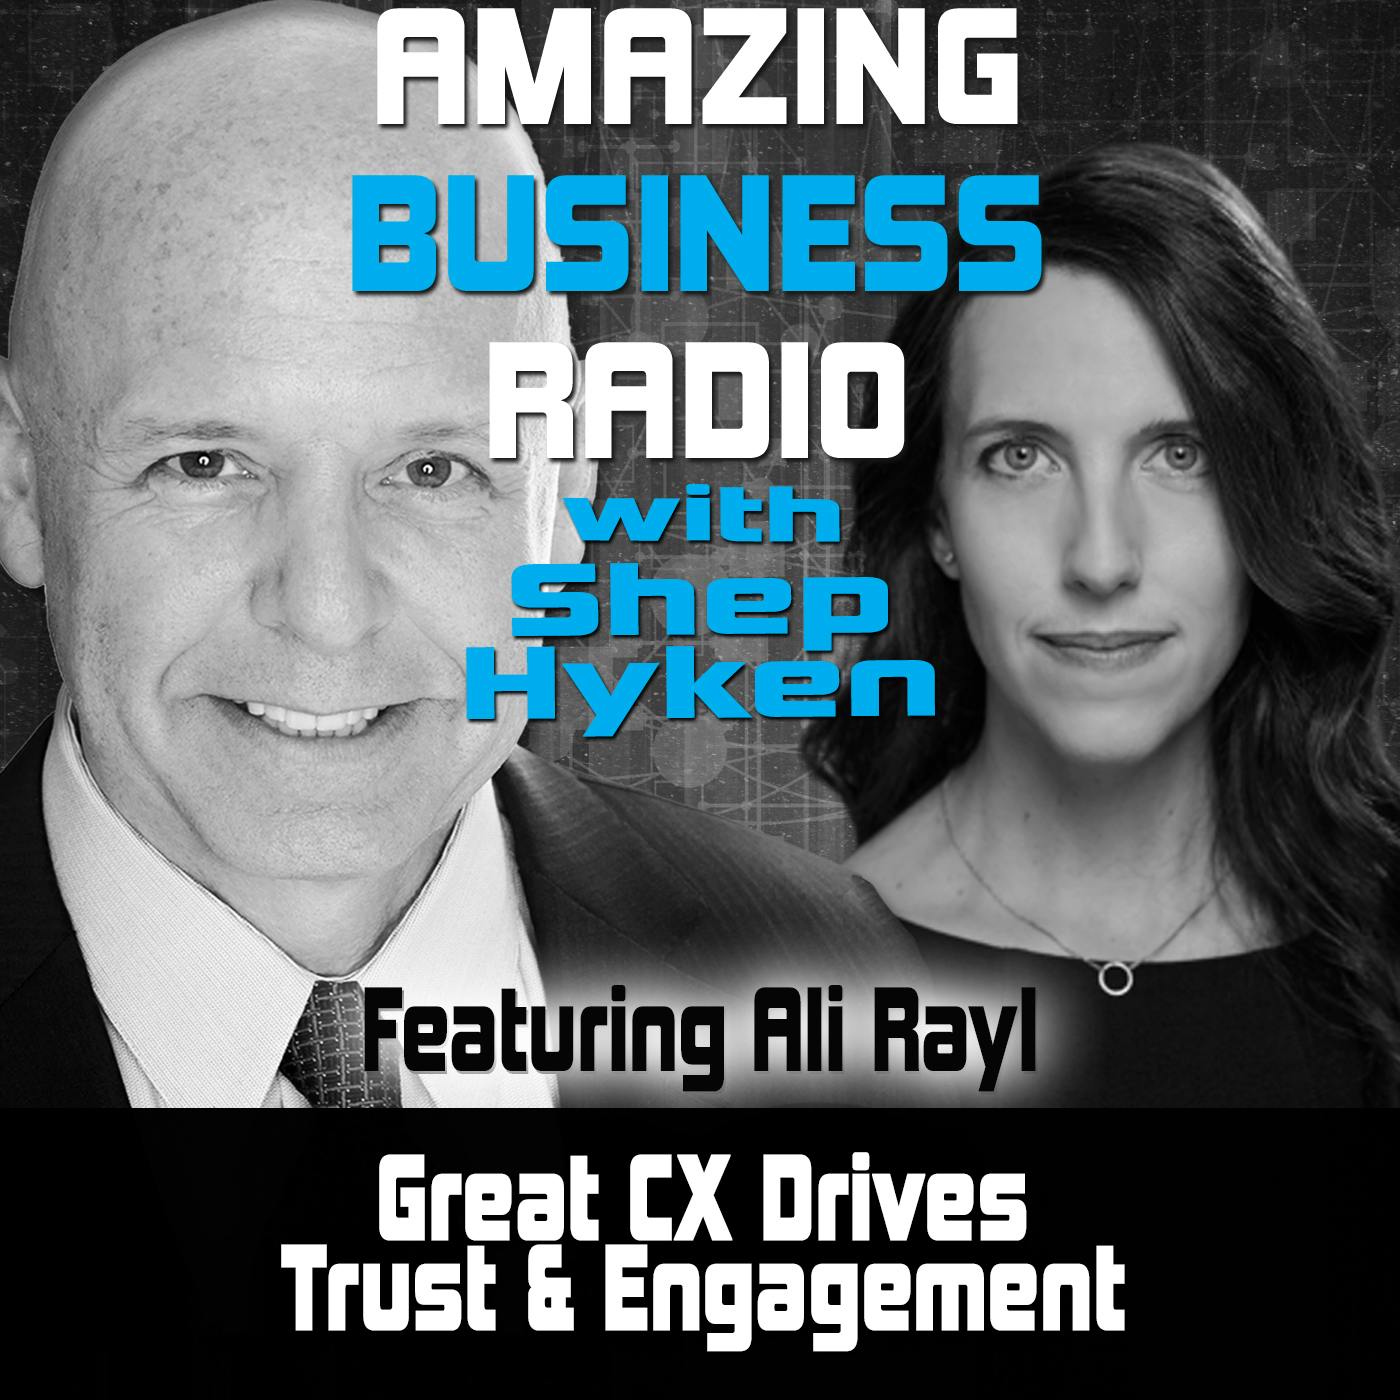 Great CX Drives Trust & Engagement Featuring Ali Rayl